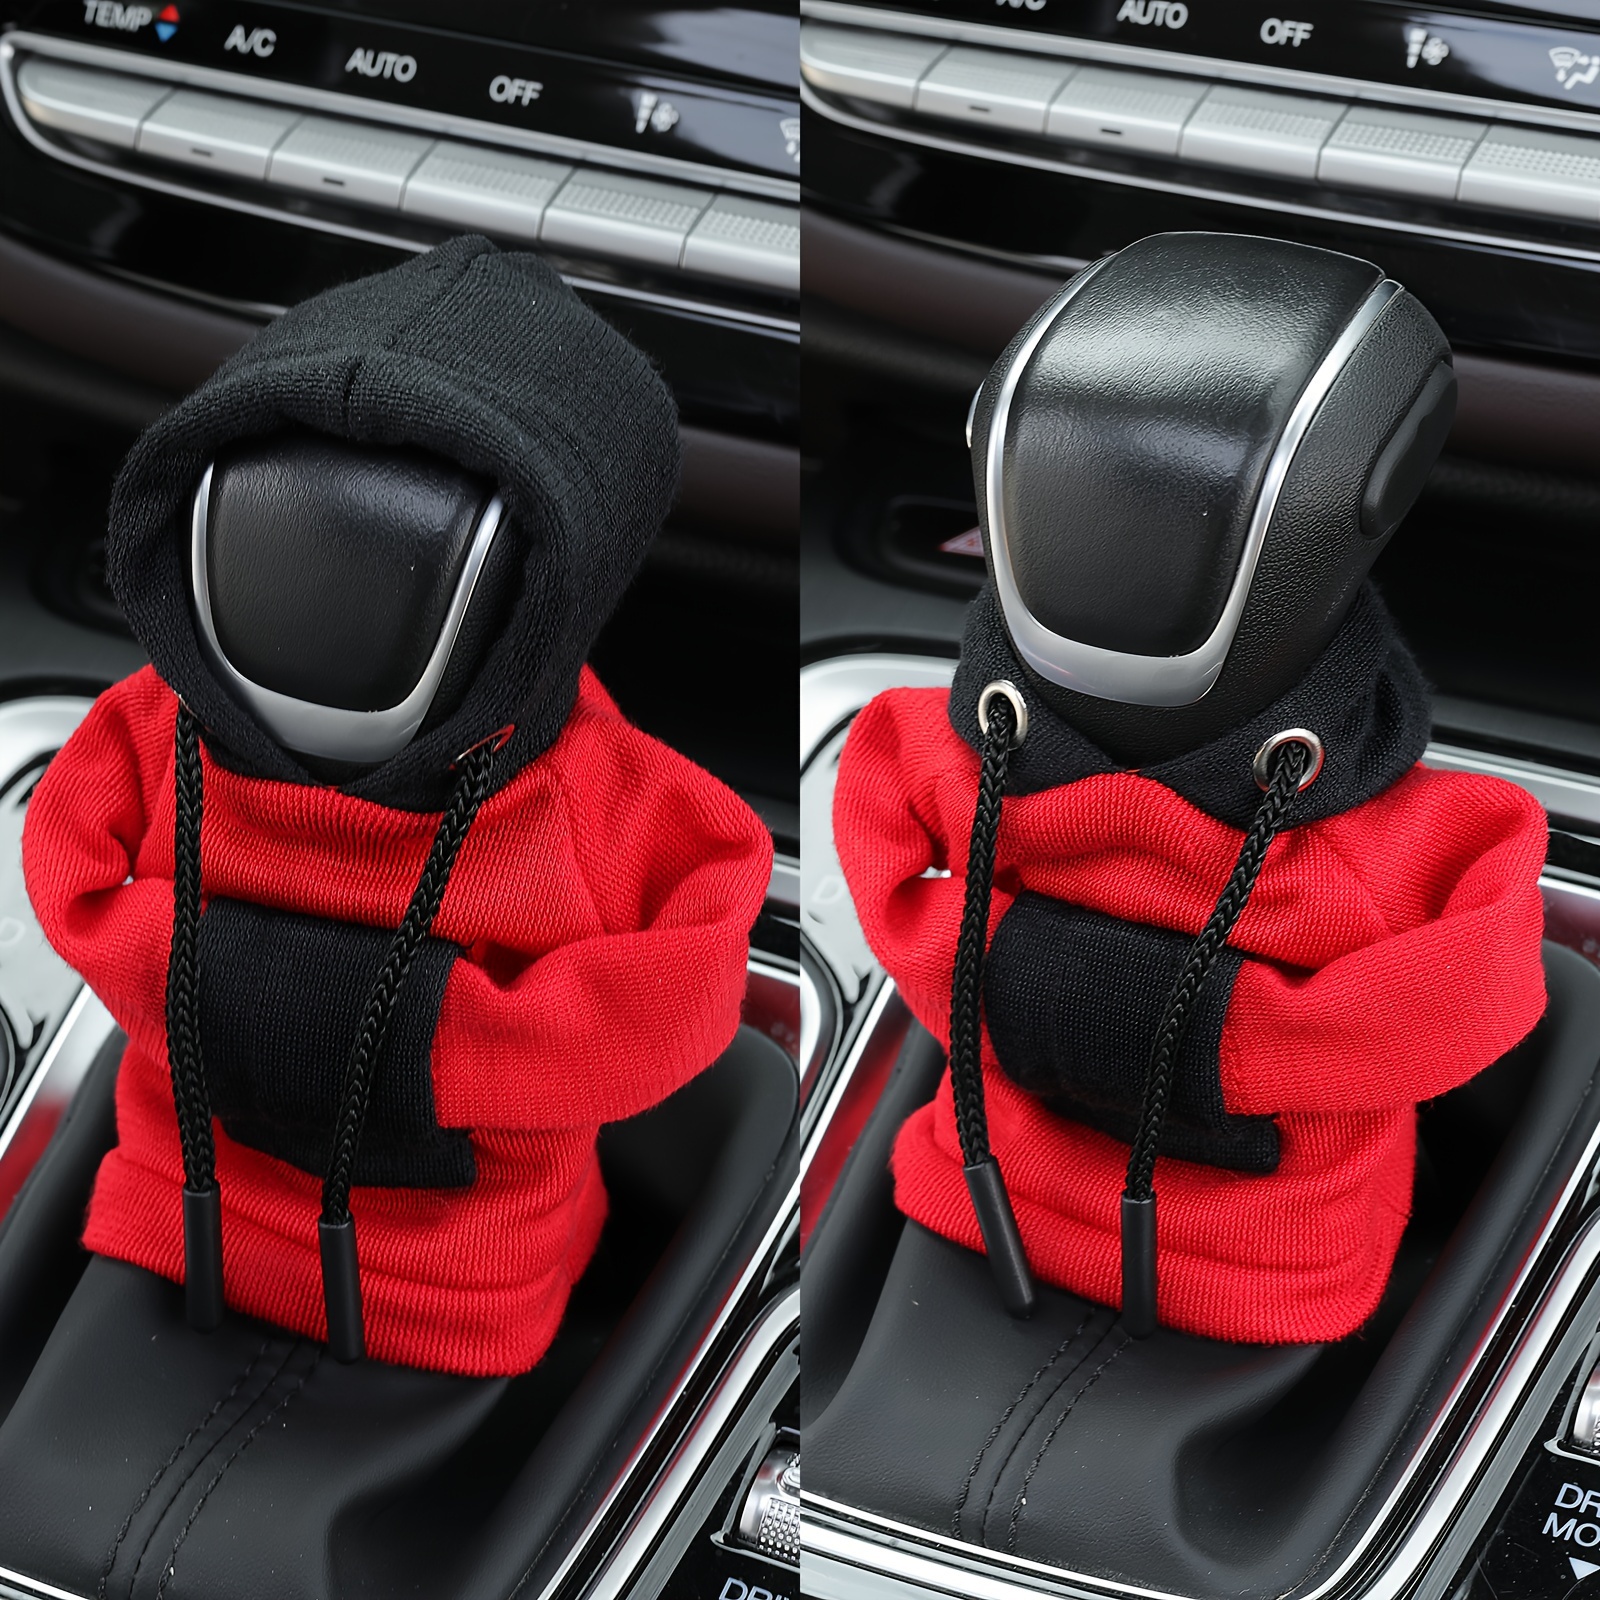 NTING Car Gear Shift Hoodie, Gear Shift Cover, Car Shifter Hoodie Cover  Sweatshirt, Universal Automotive Interior Accessories Gift, Black